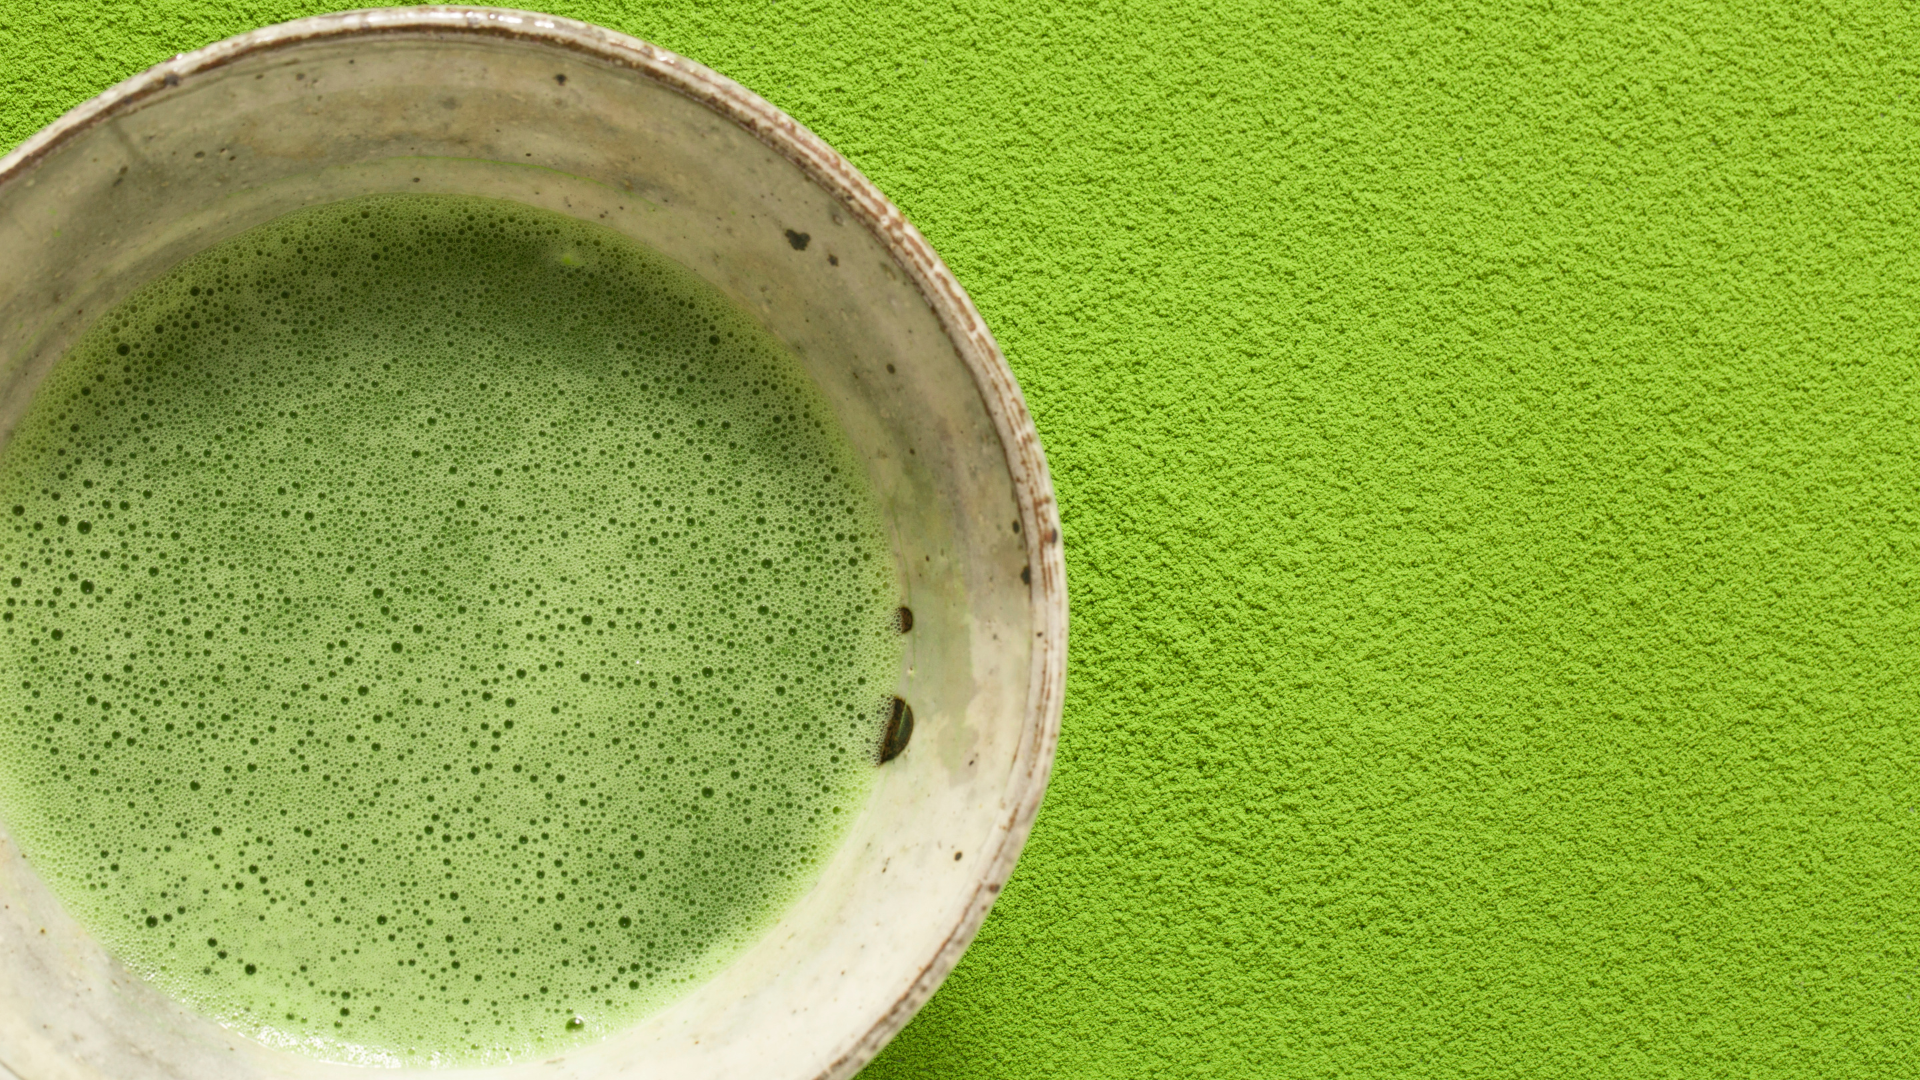 A bowl of matcha green tea on a flat surface covered in matcha powder